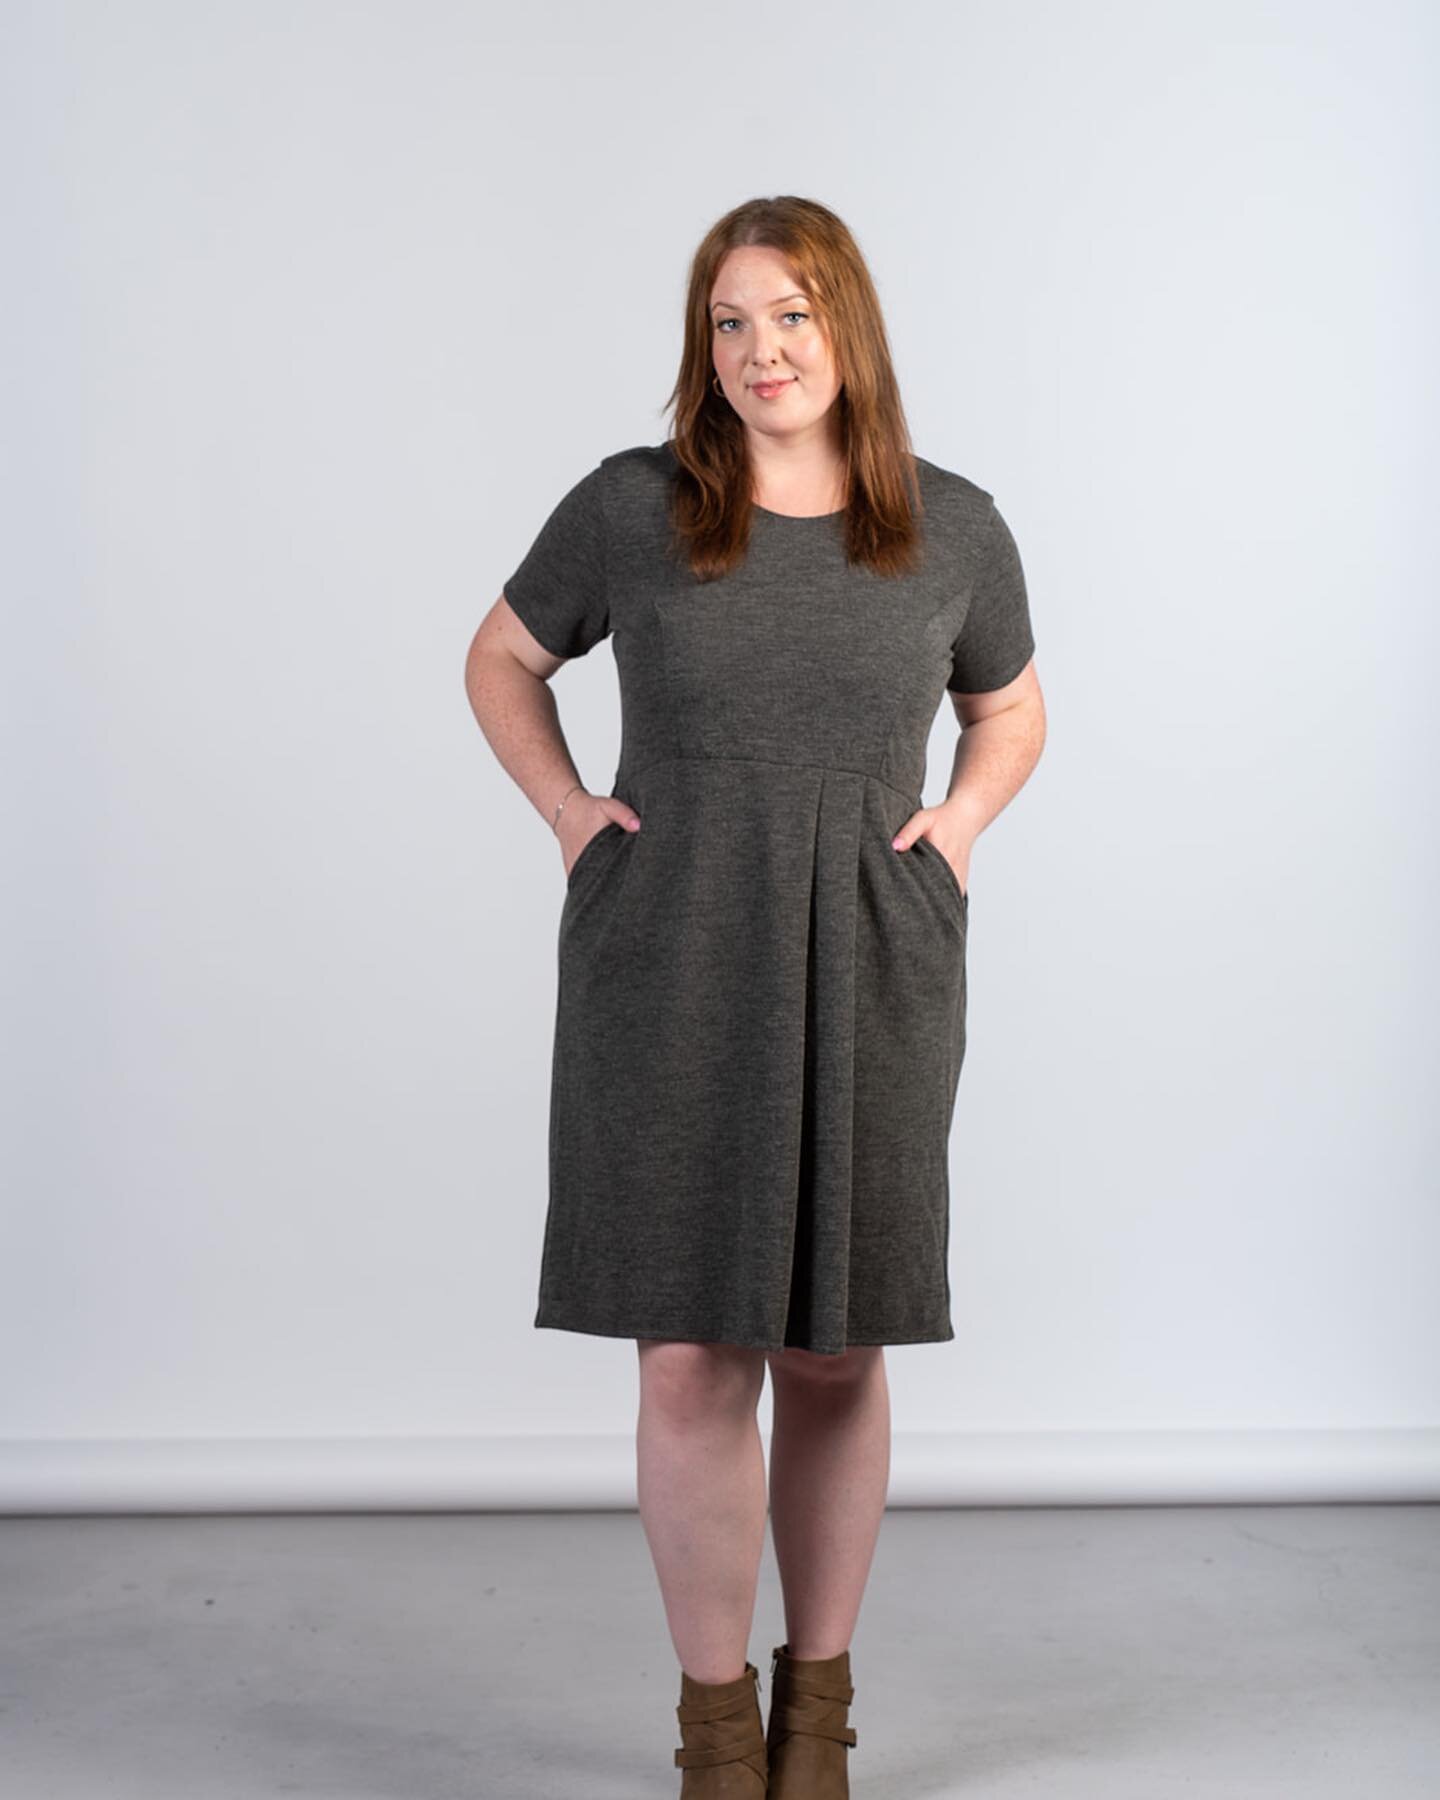 I&rsquo;m back home and ready for fall. We&rsquo;ve recut 2 popular styles from past seasons. I had fabric left so why not 🤷🏻&zwj;♀️ and we&rsquo;ve had a ton of folks looking for back to office clothing.

First up is the Robin dress. Available in 